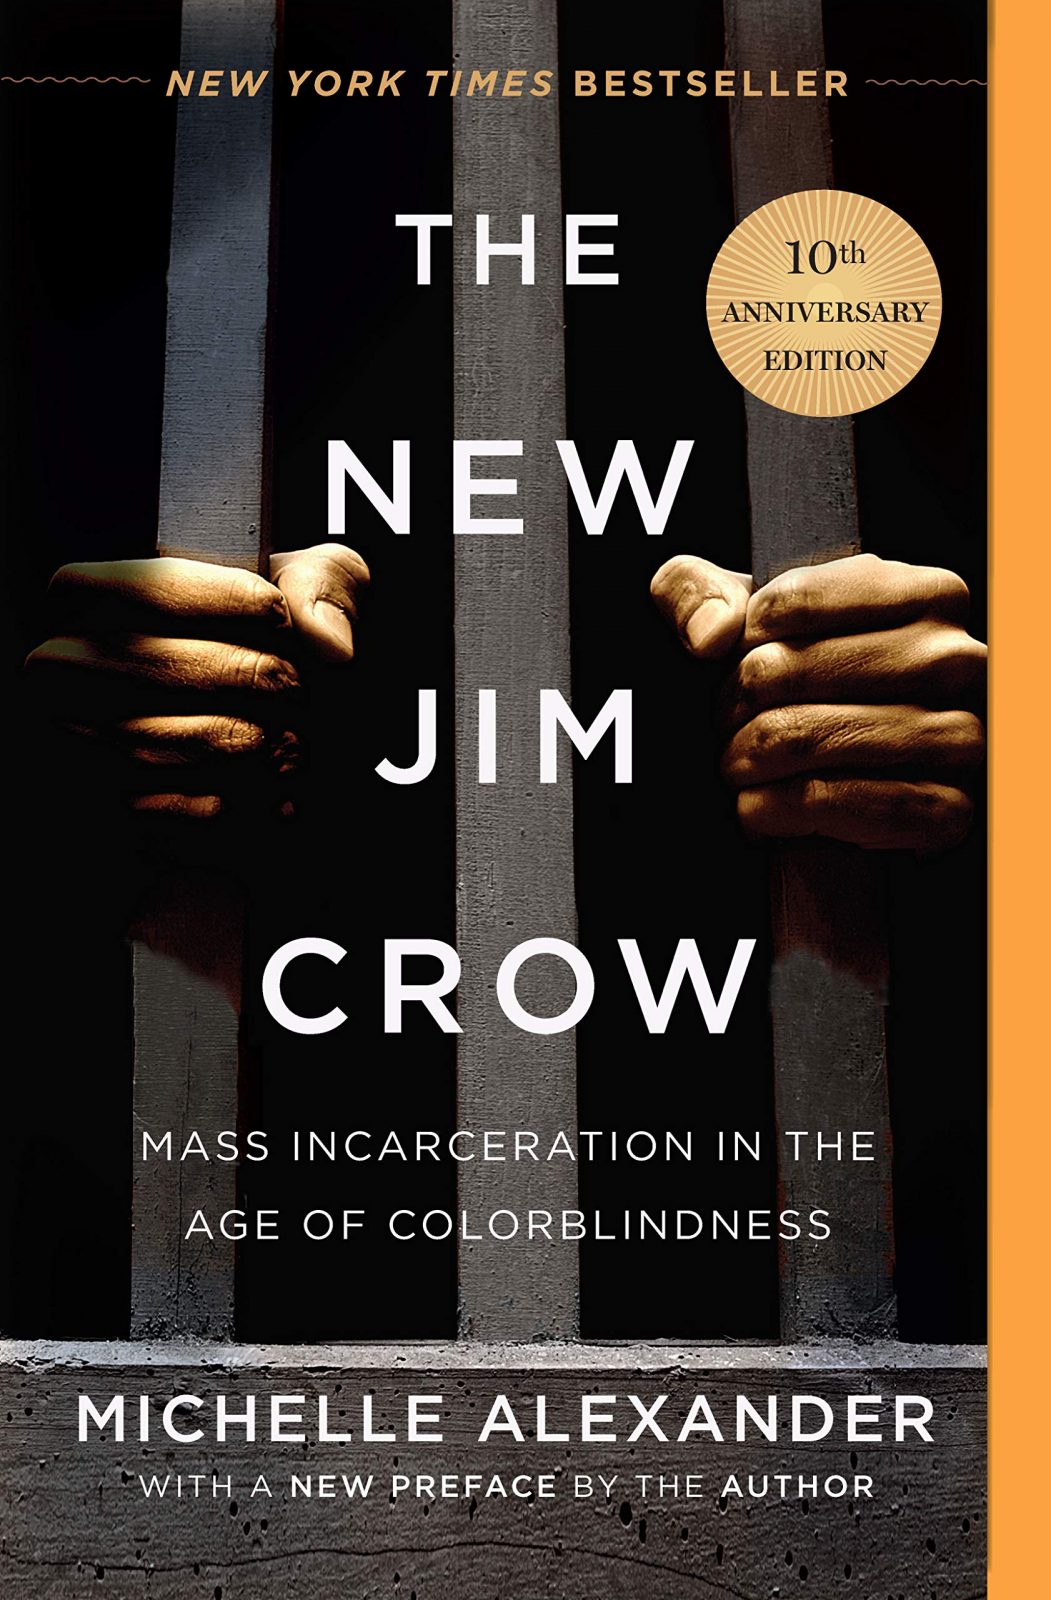 Alexander - The New Jim Crow: Mass Incarceration in the Age of Colorblindness